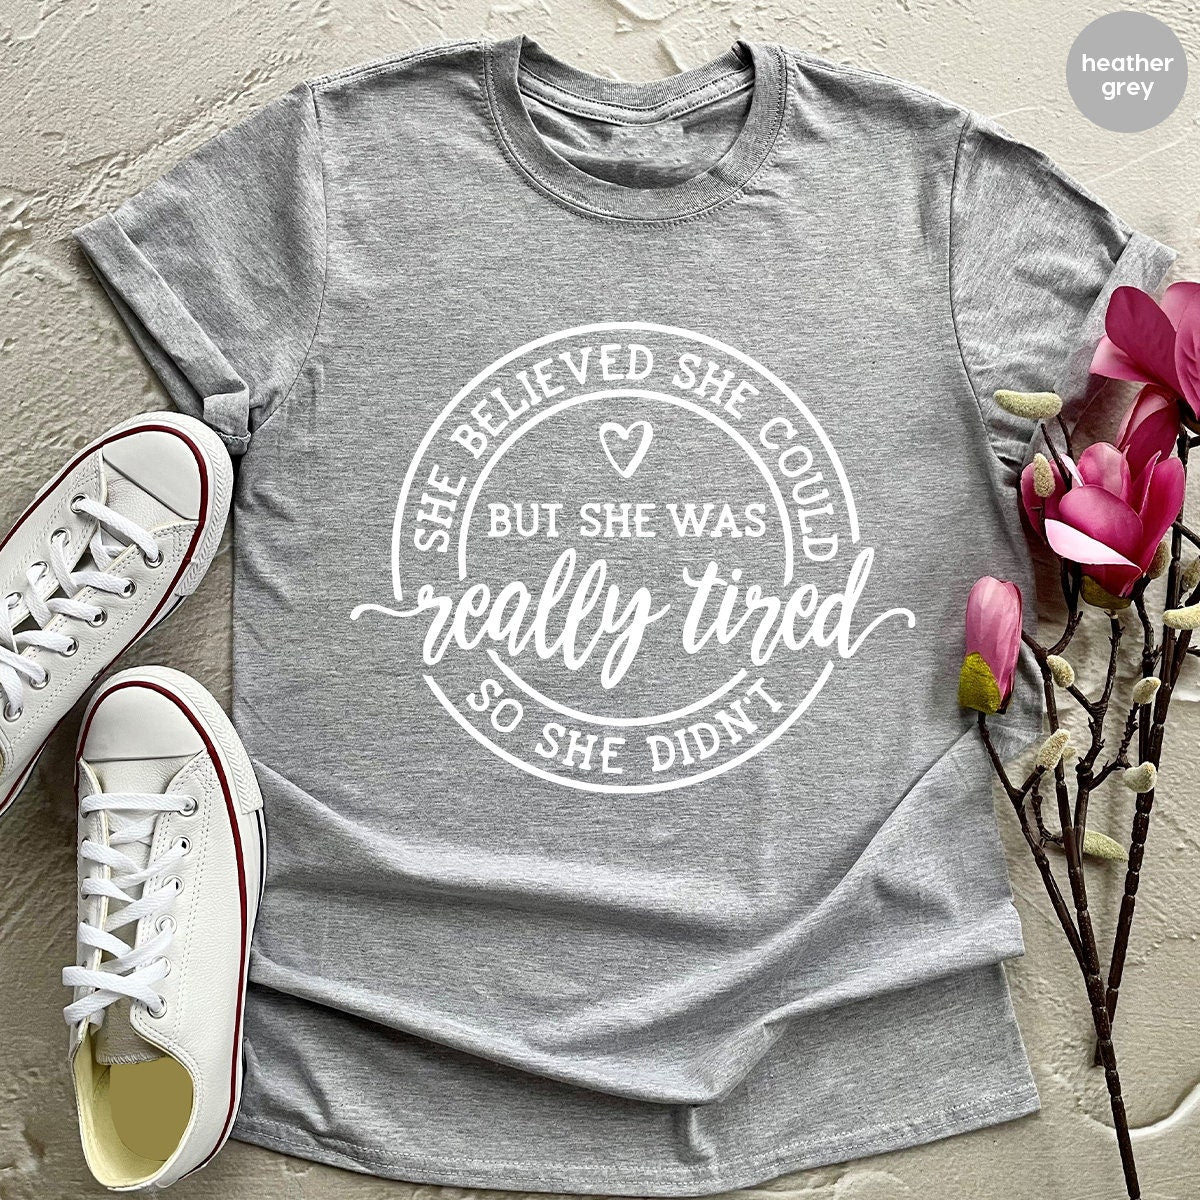 Funny Lazy Days Shirt, She Believed She Could But She Was Really Tired So She Didn't Shirt, Tired Mom Shirt, Moms Life  Shirt, New Mom Shirt - Fastdeliverytees.com